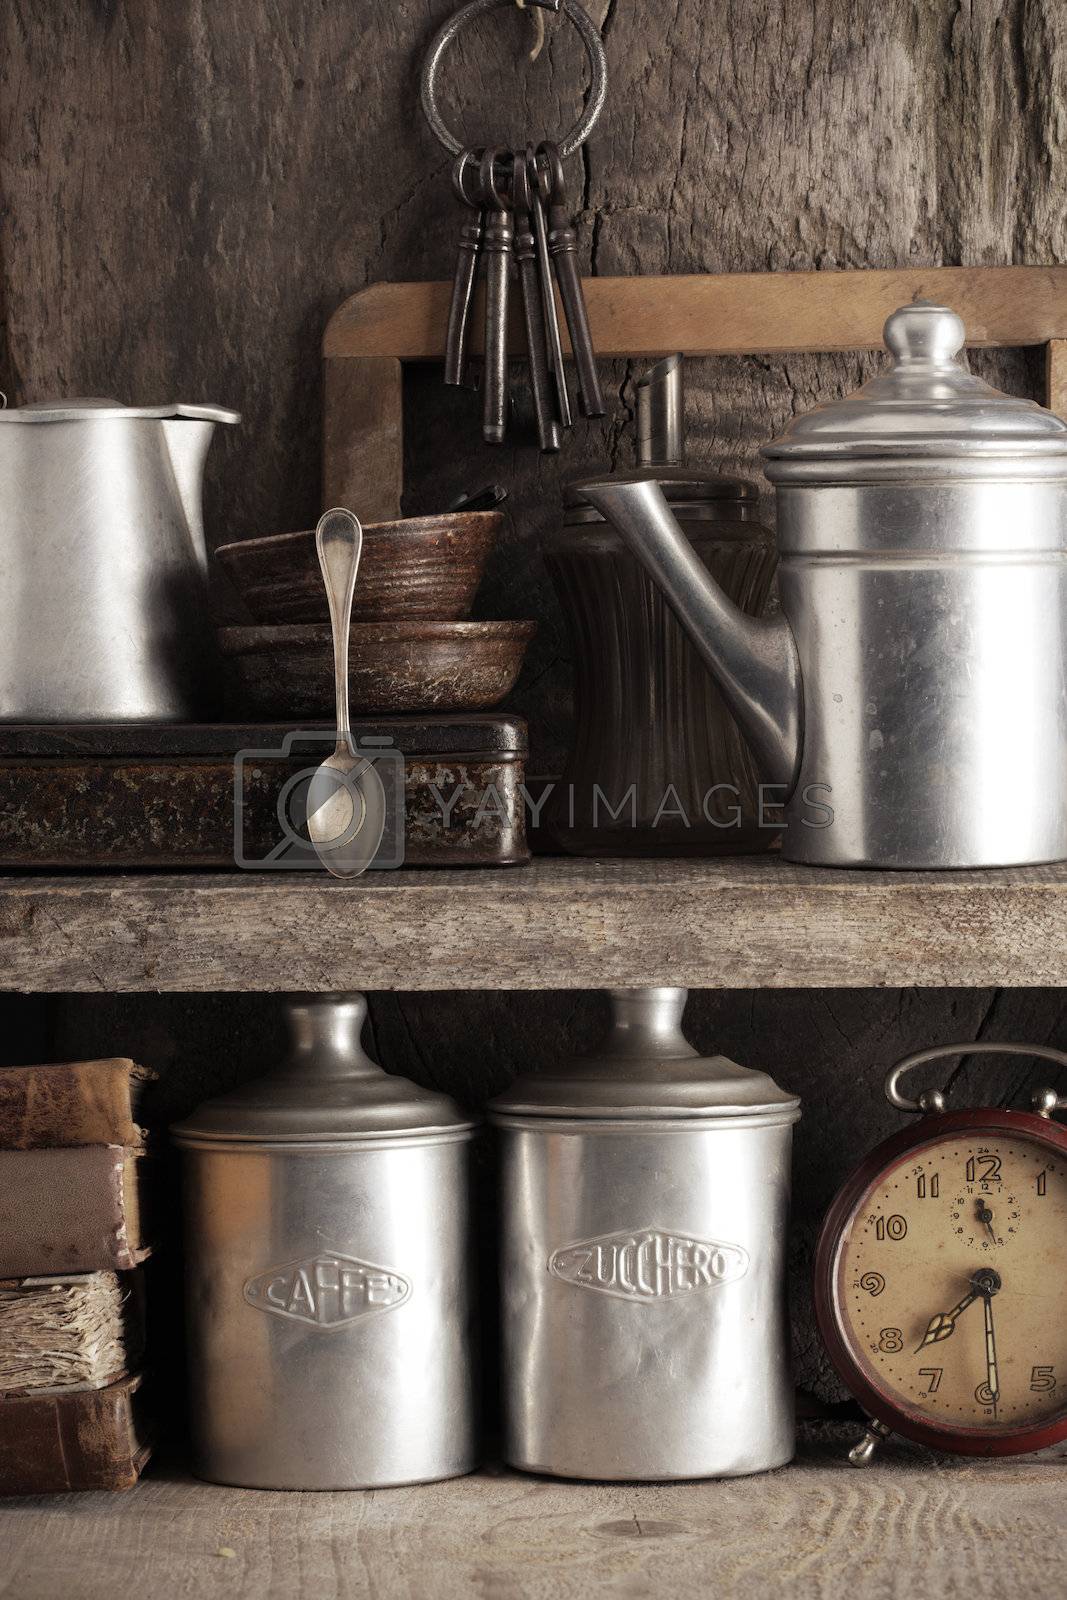 Royalty free image of Old objects by stokkete